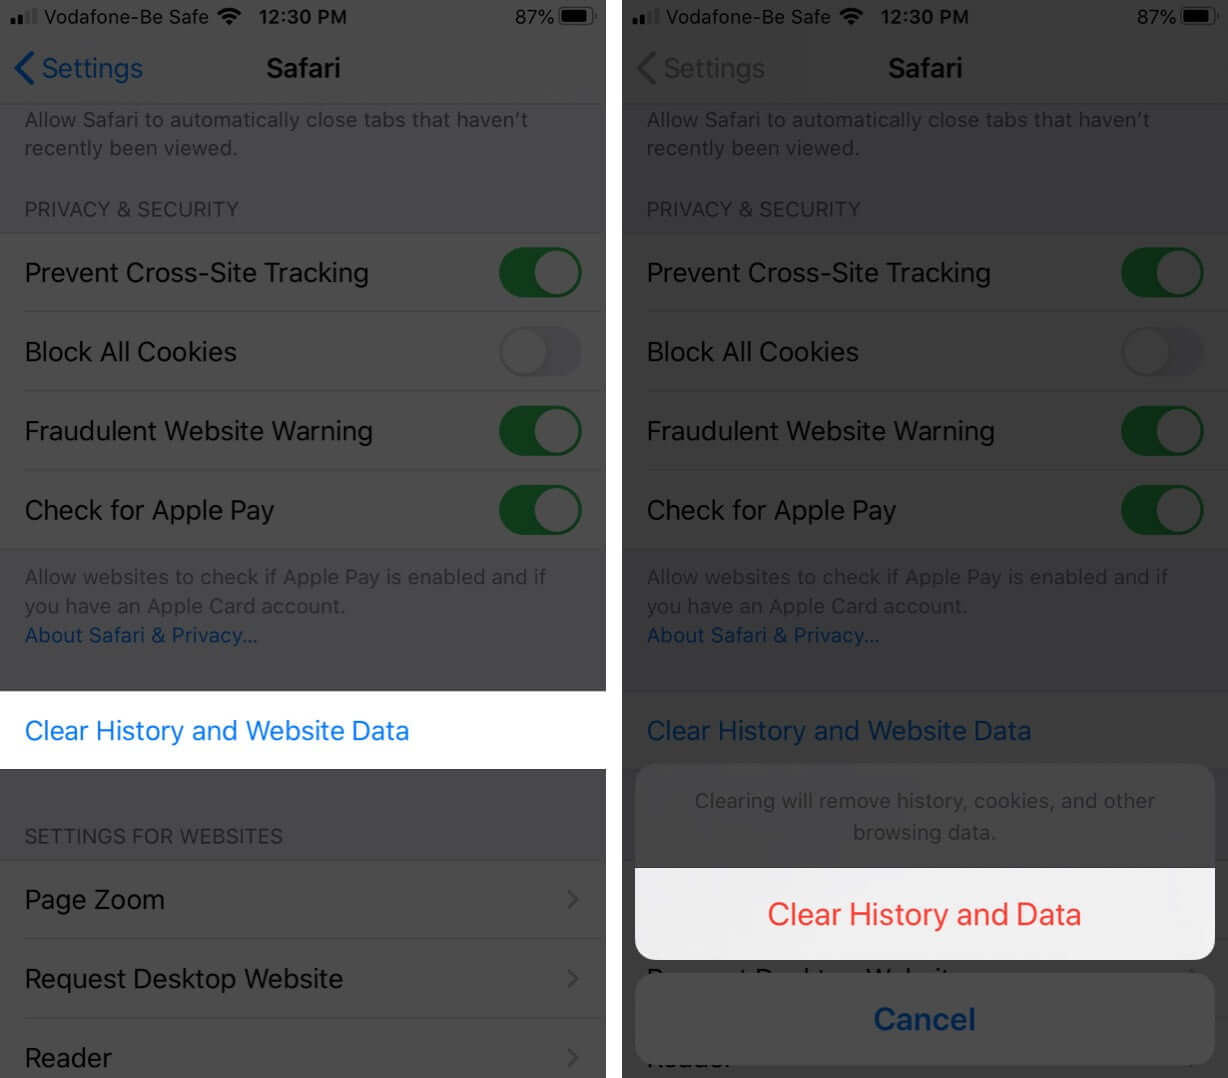 Tap on Clear History and Website Data to Delete History and Cookies in Safari on iPhone